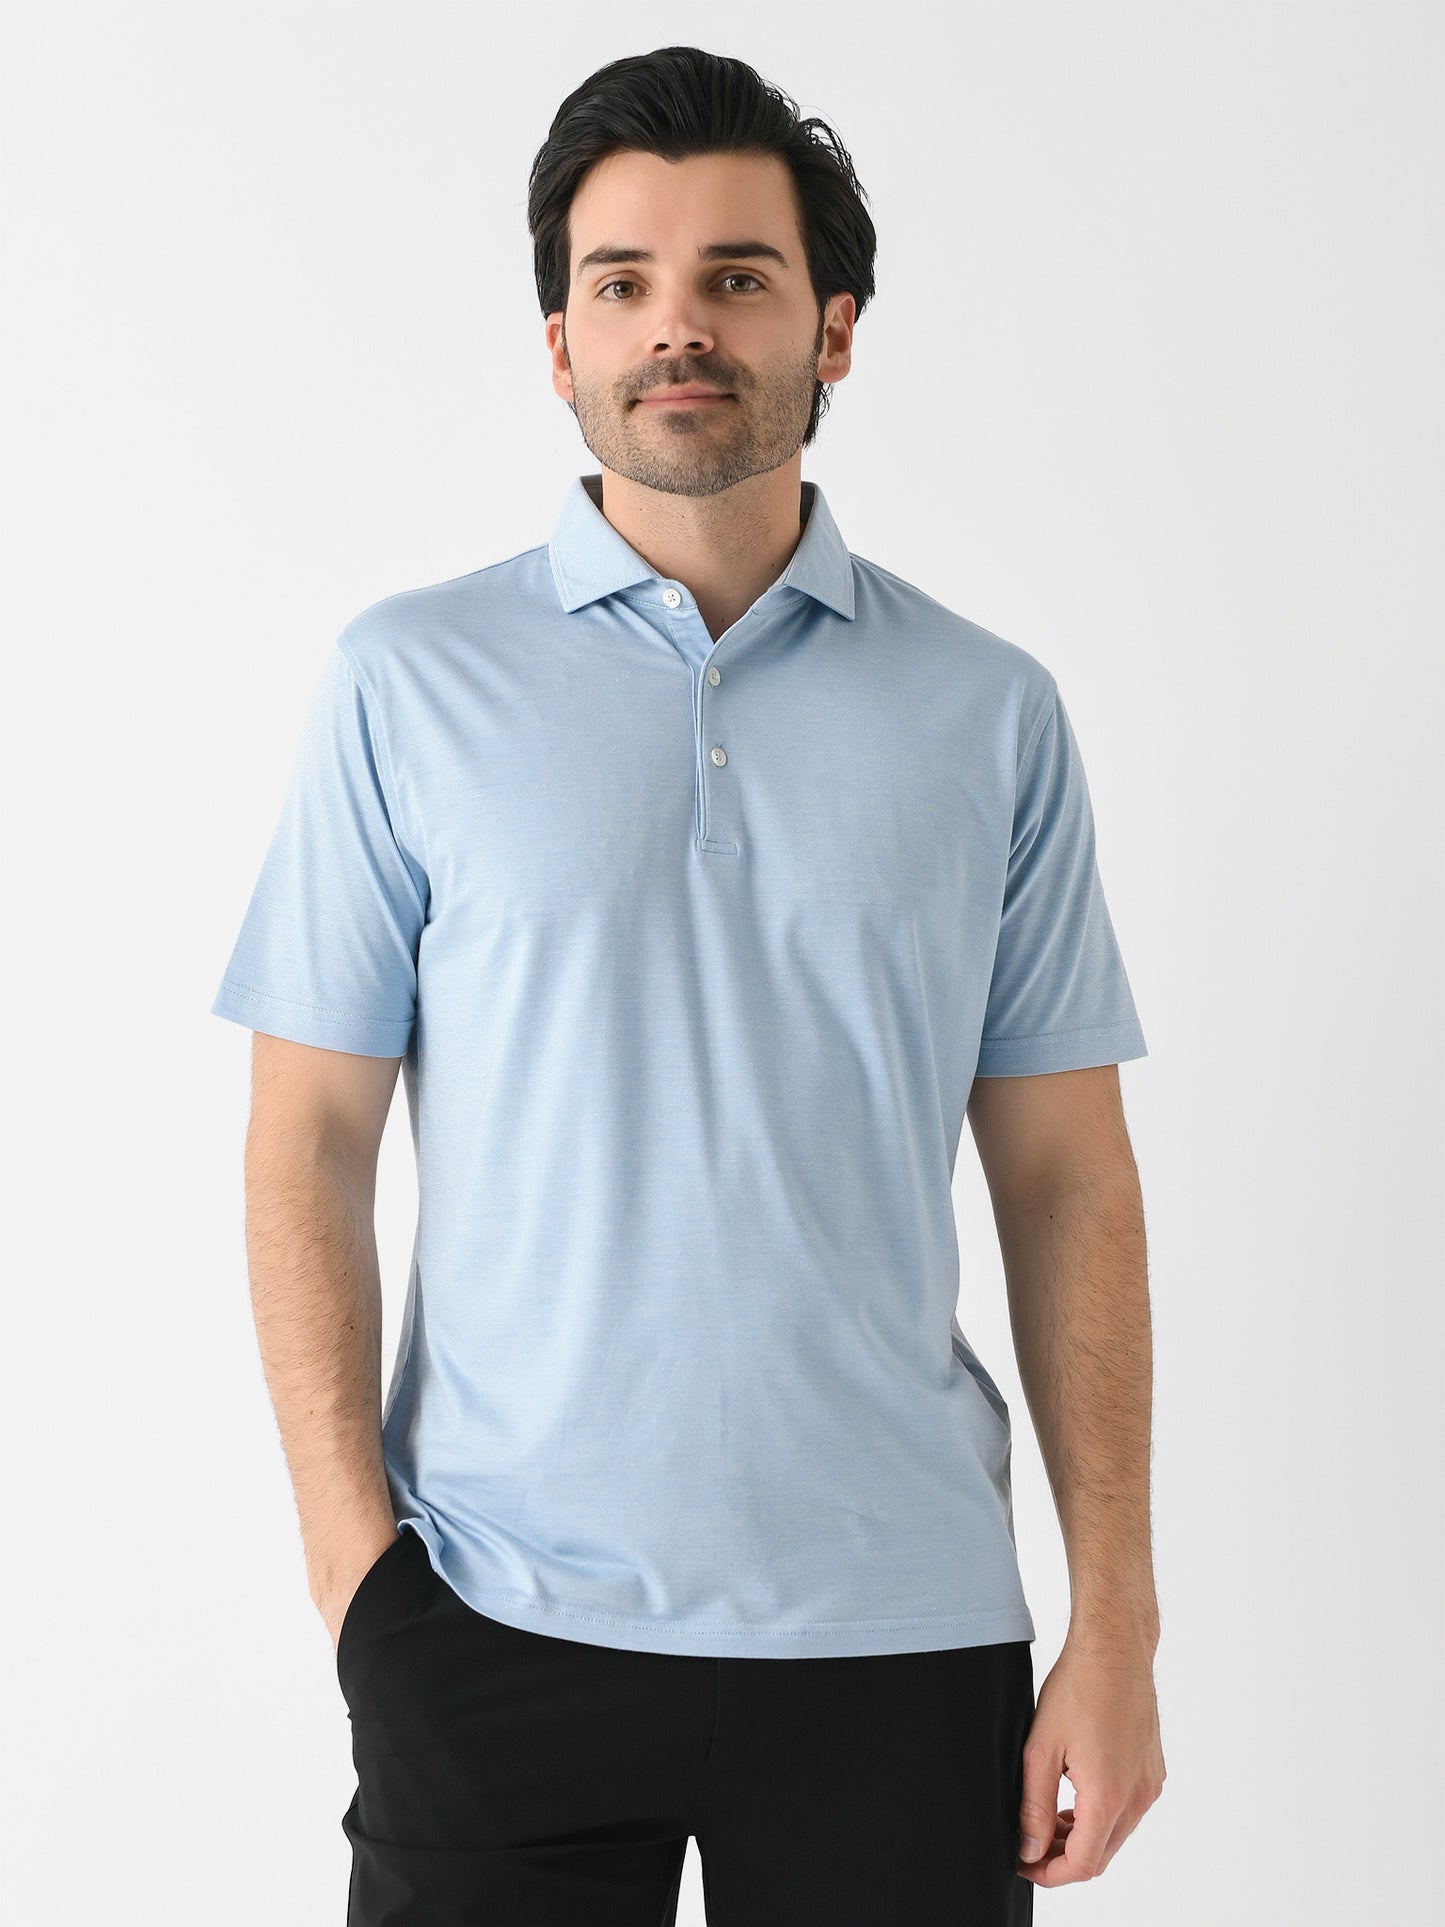 Peter Millar Crown Crafted Men's Excursionist Flex Short Sleeve Polo